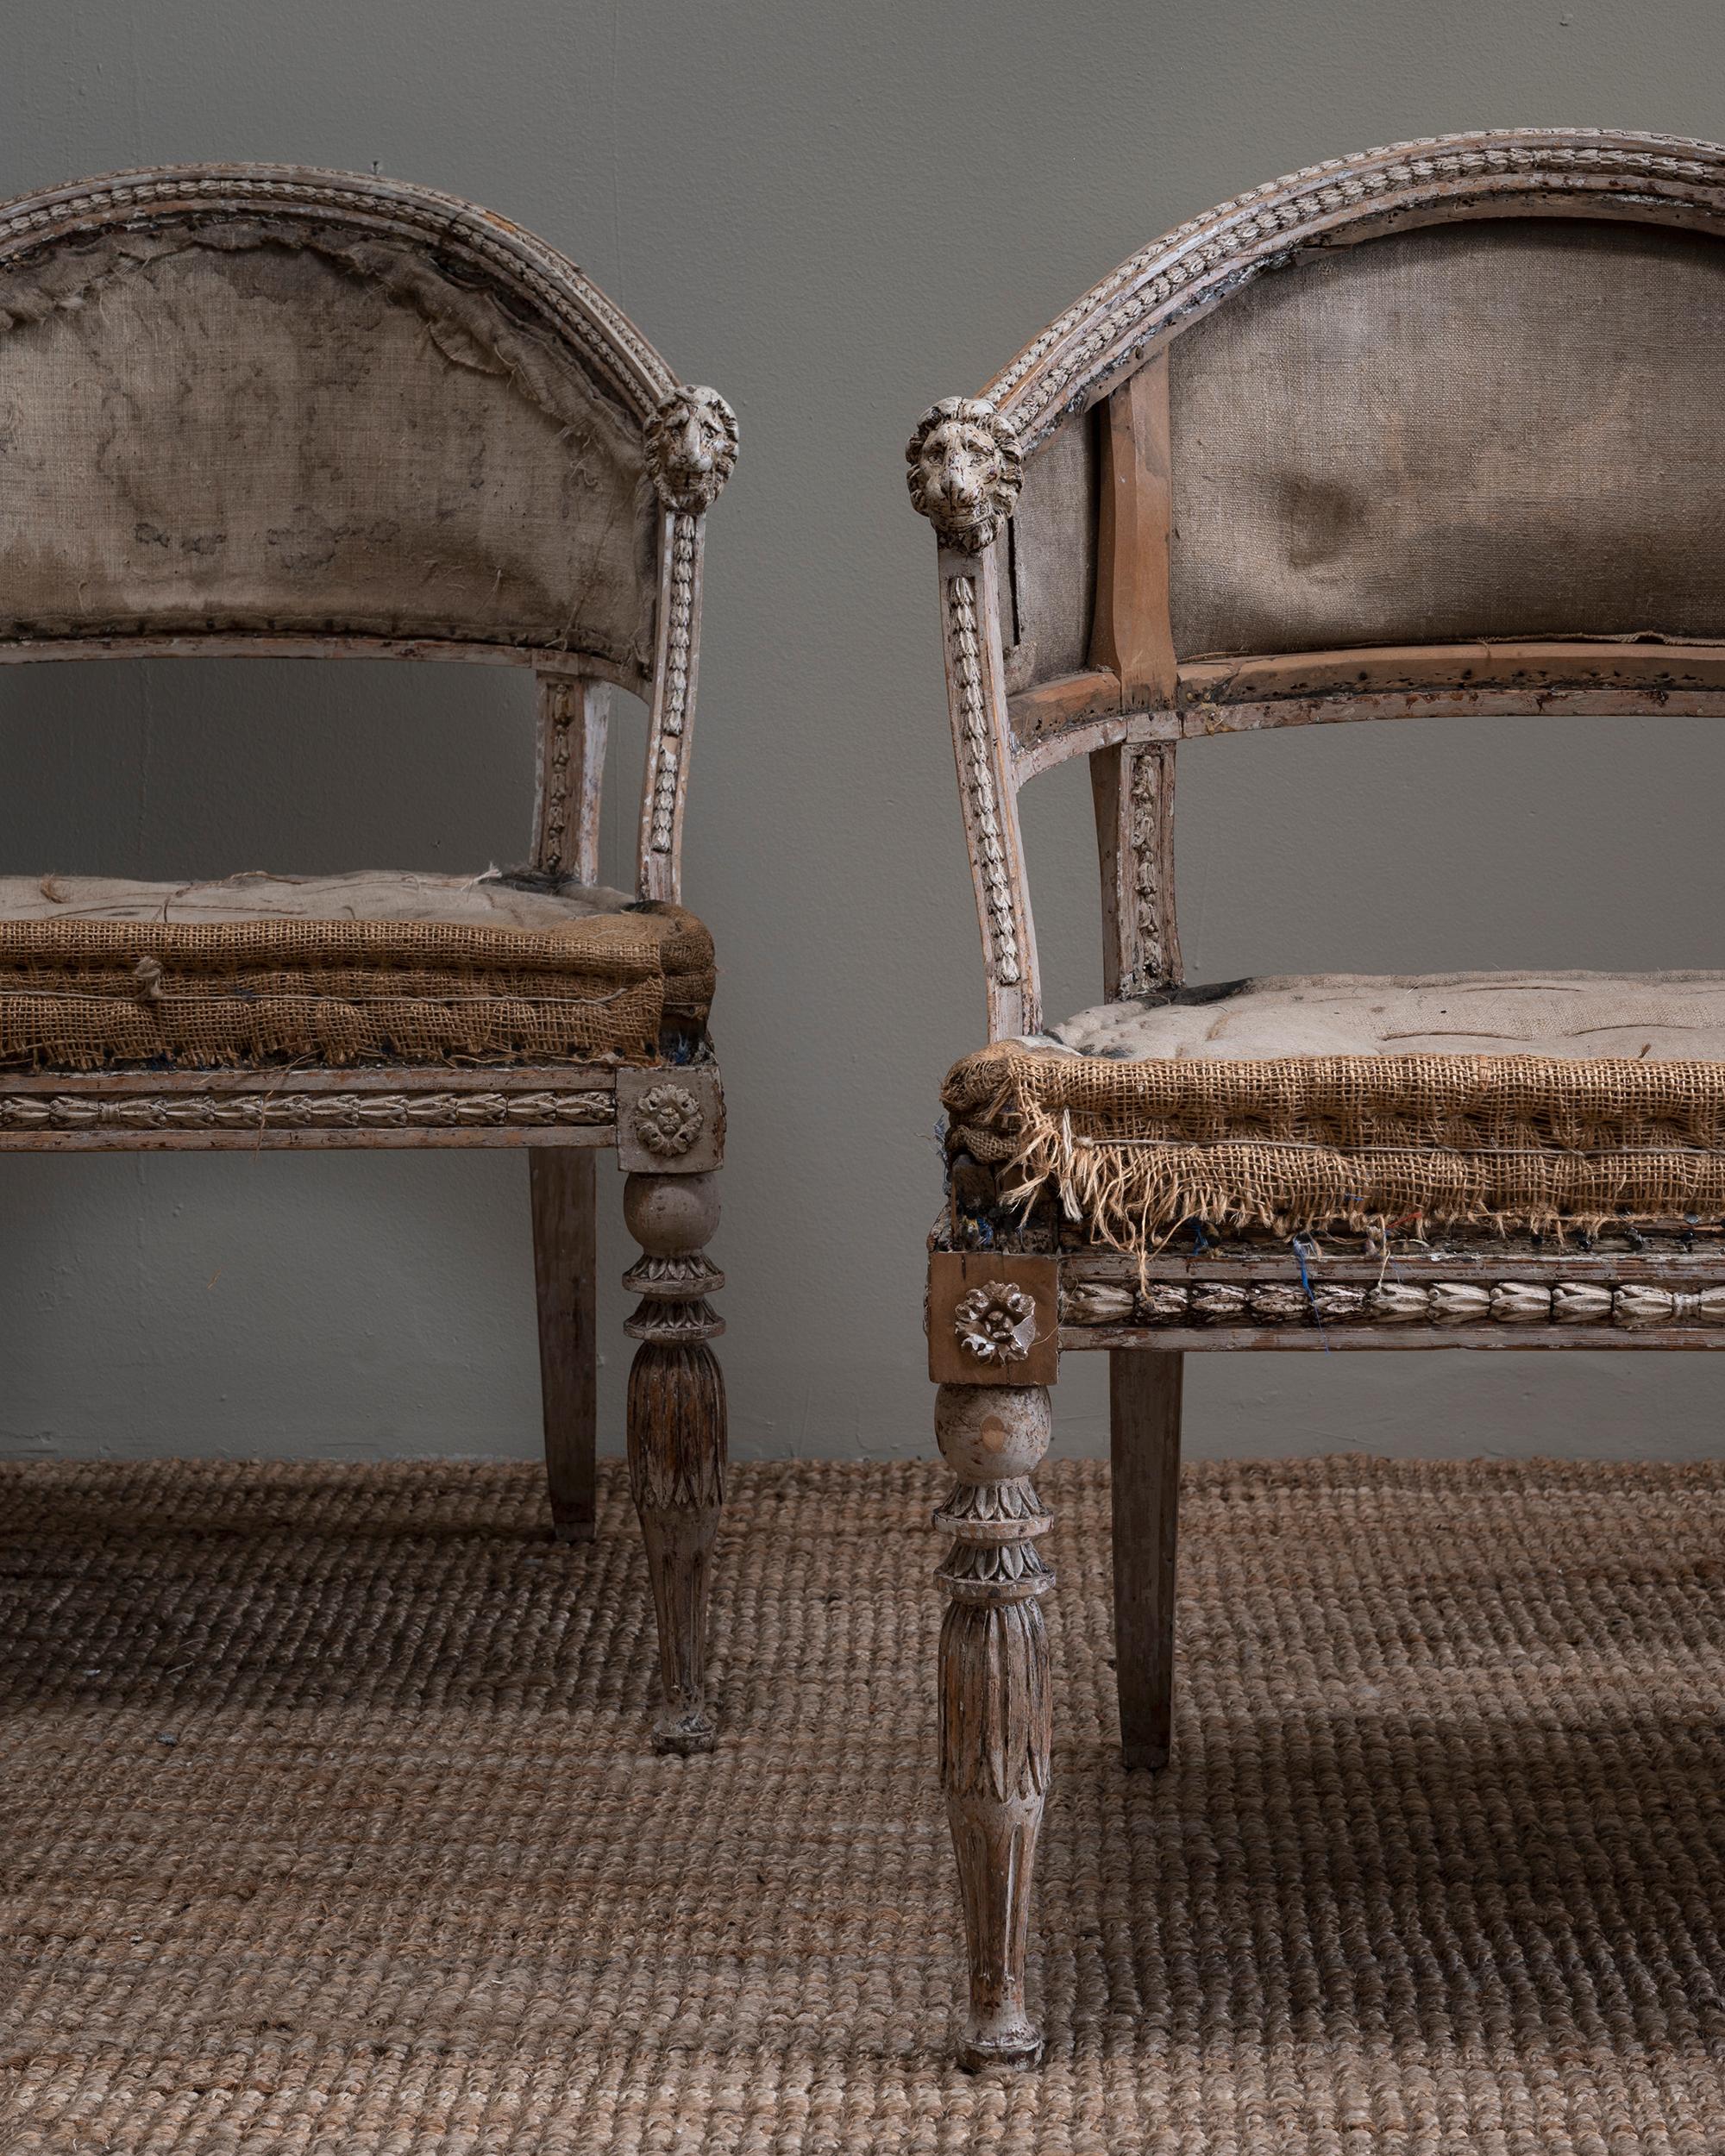 Fine pair of early 19th century late Gustavian barrel back armchairs in their original condition with lion head carvings on the armrests, needs upholstery. Ca 1810 Sweden.